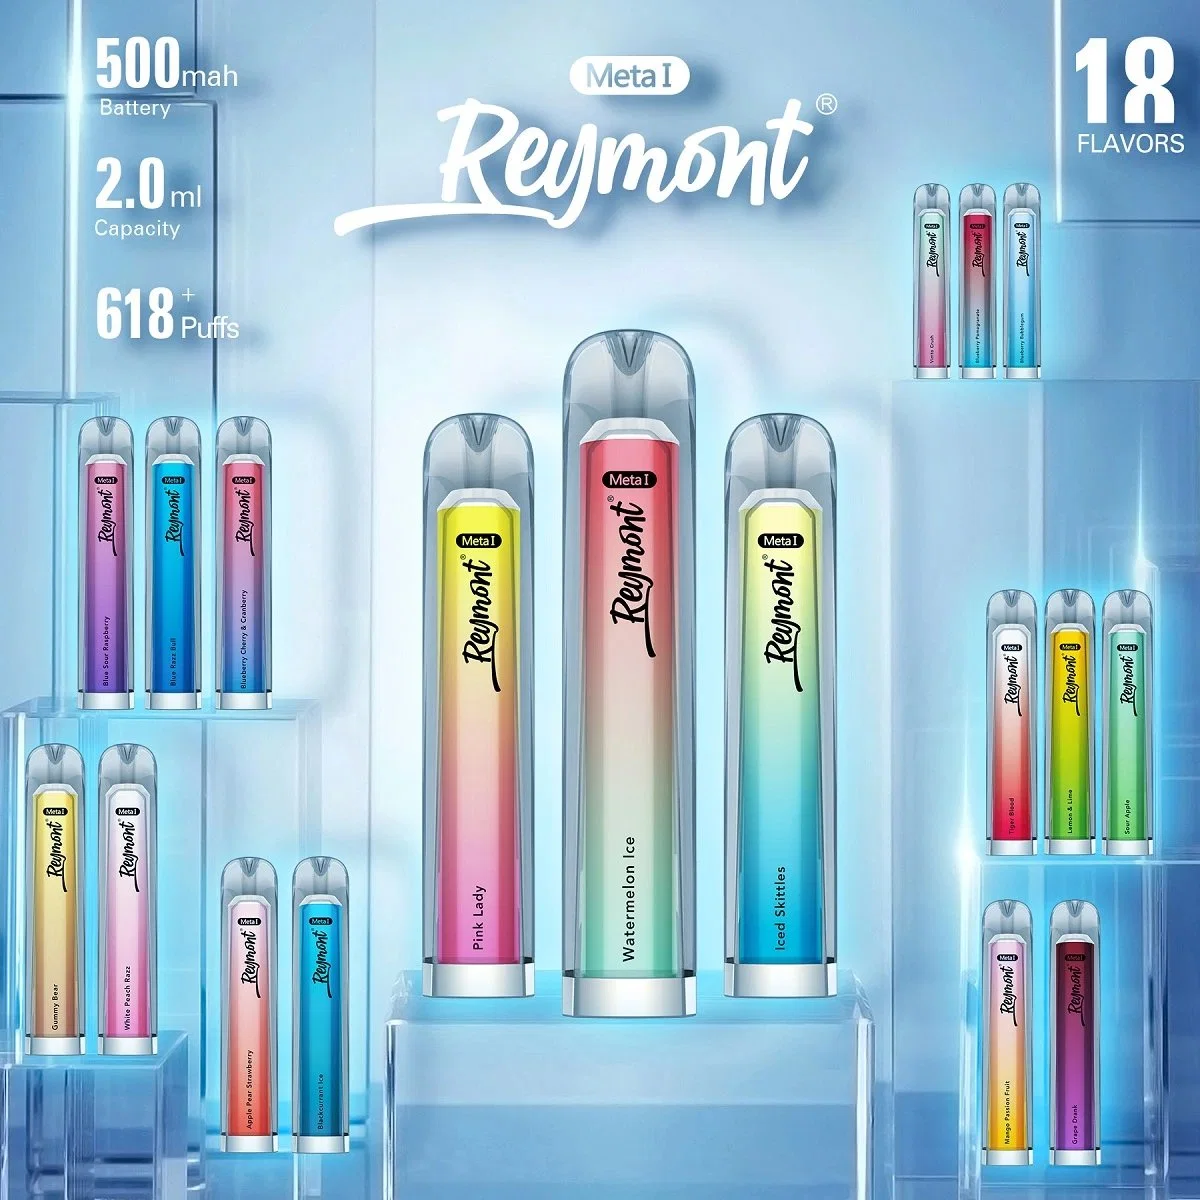 Reymont Meta I Like Crystal Tpd Available Mesh Coil up to 618 Puffs Disposable Electronic Cigarette Vape Pen